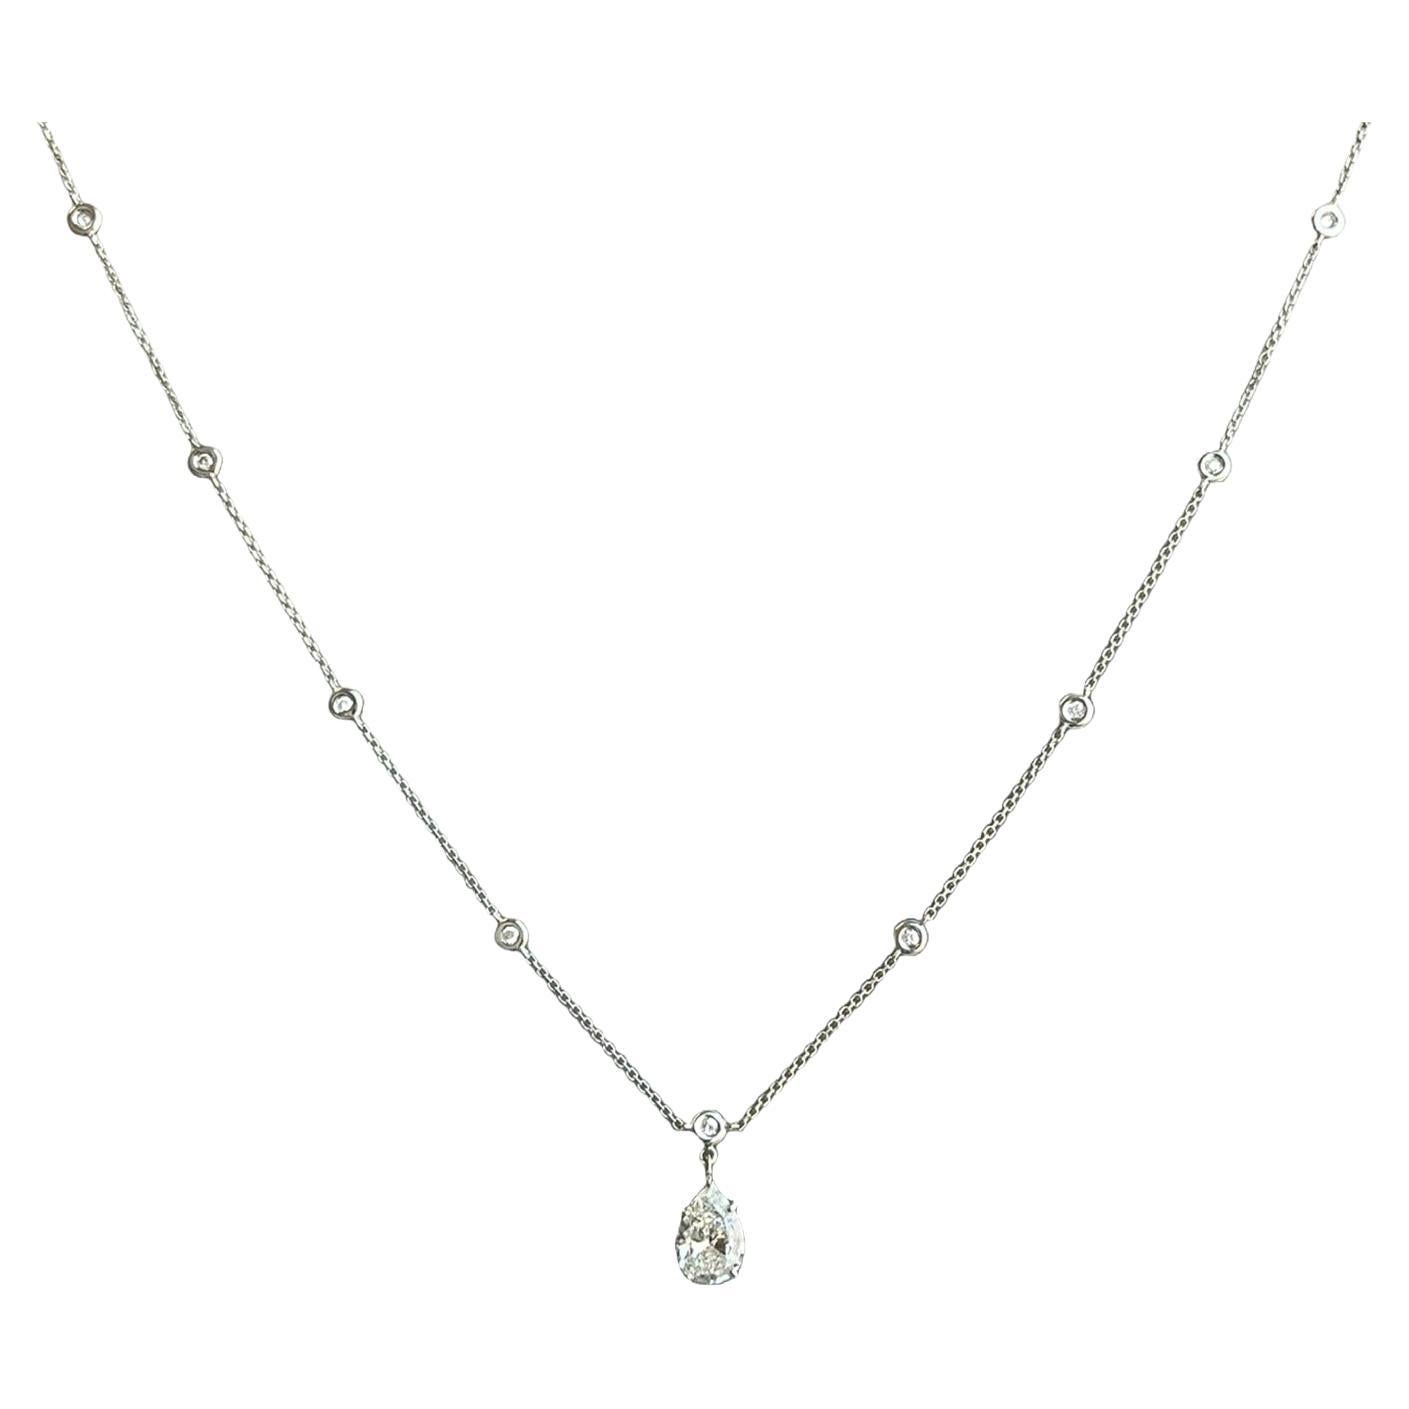 1.56ct Pear Shape Diamond Link Chain Station Necklace Pendant 14K White Gold For Sale